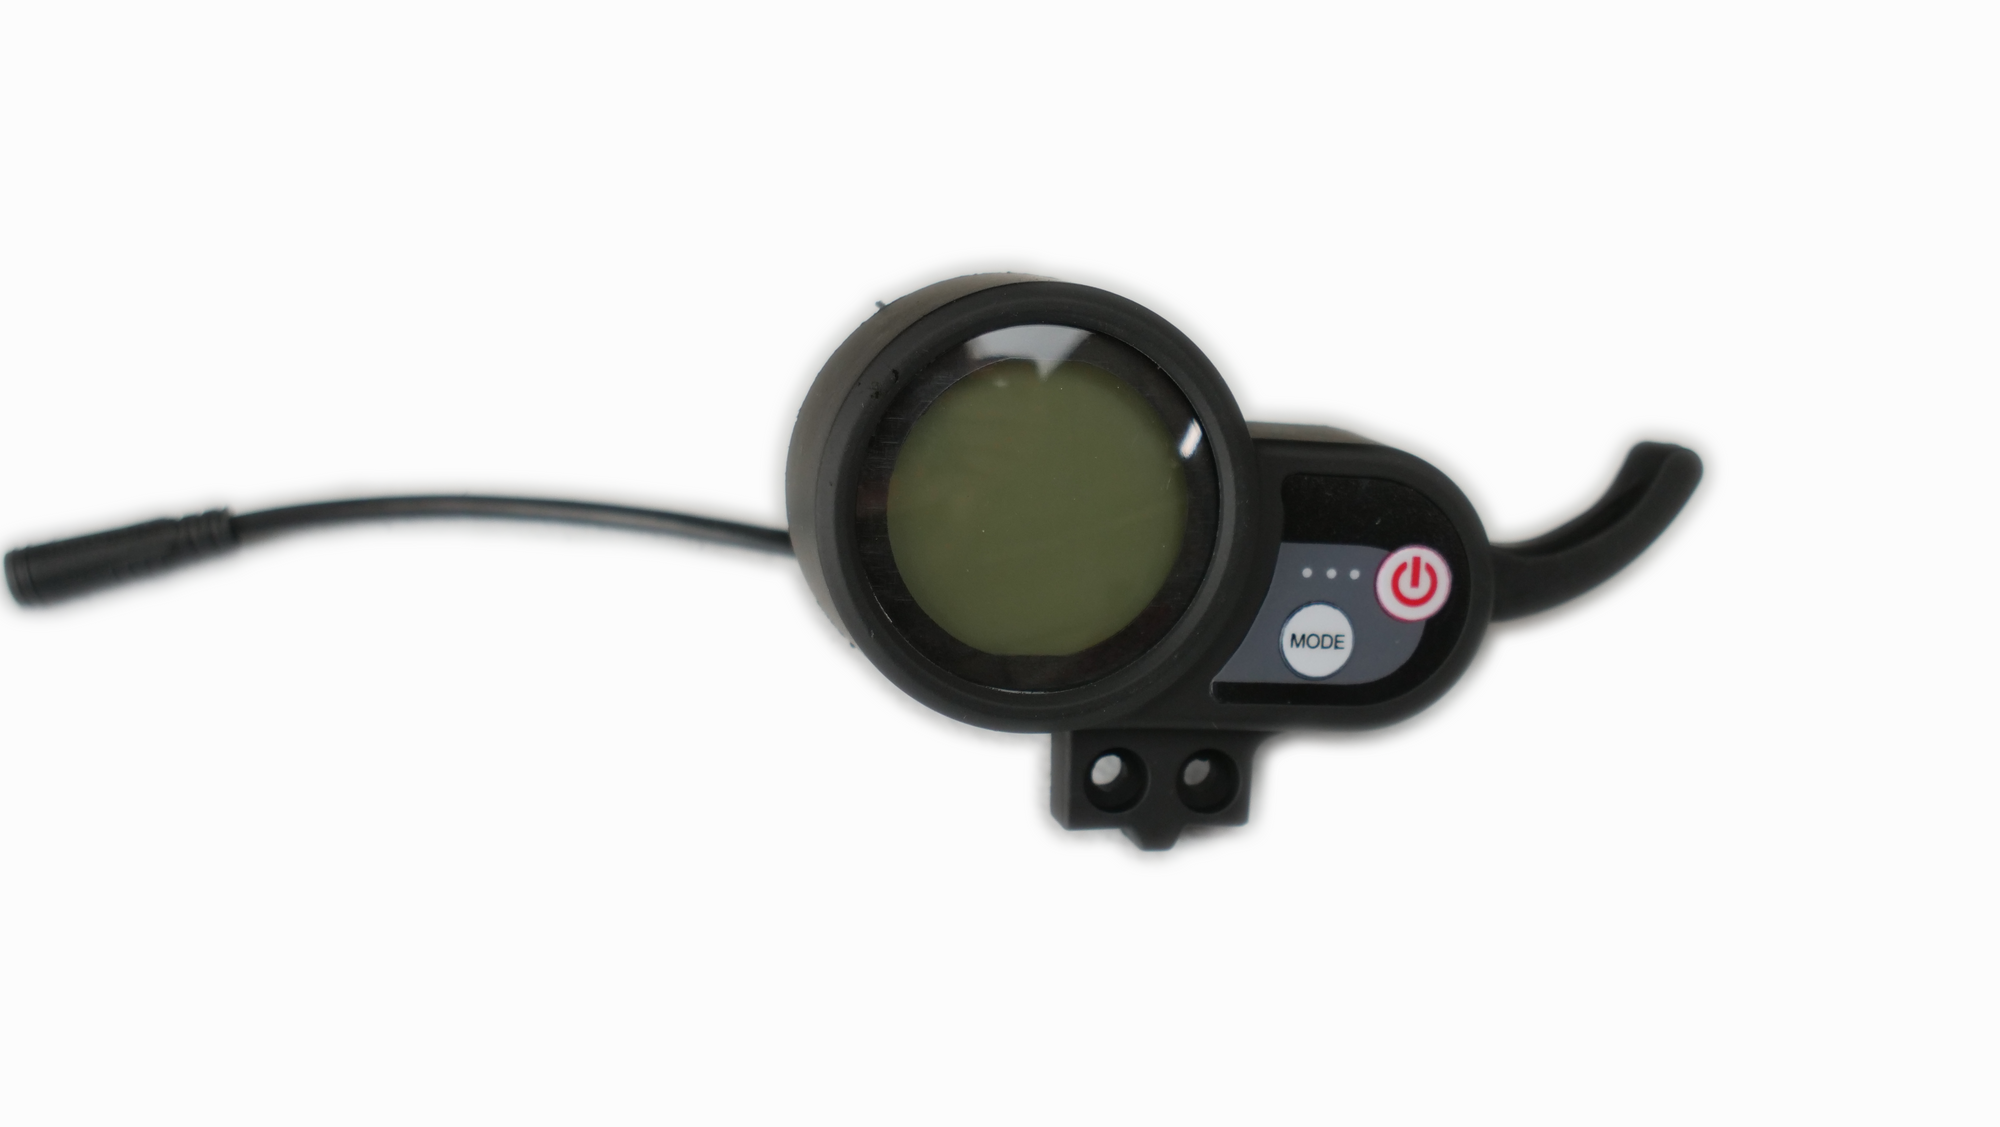 LCD Throttle Plug and Play Display for Cruiser